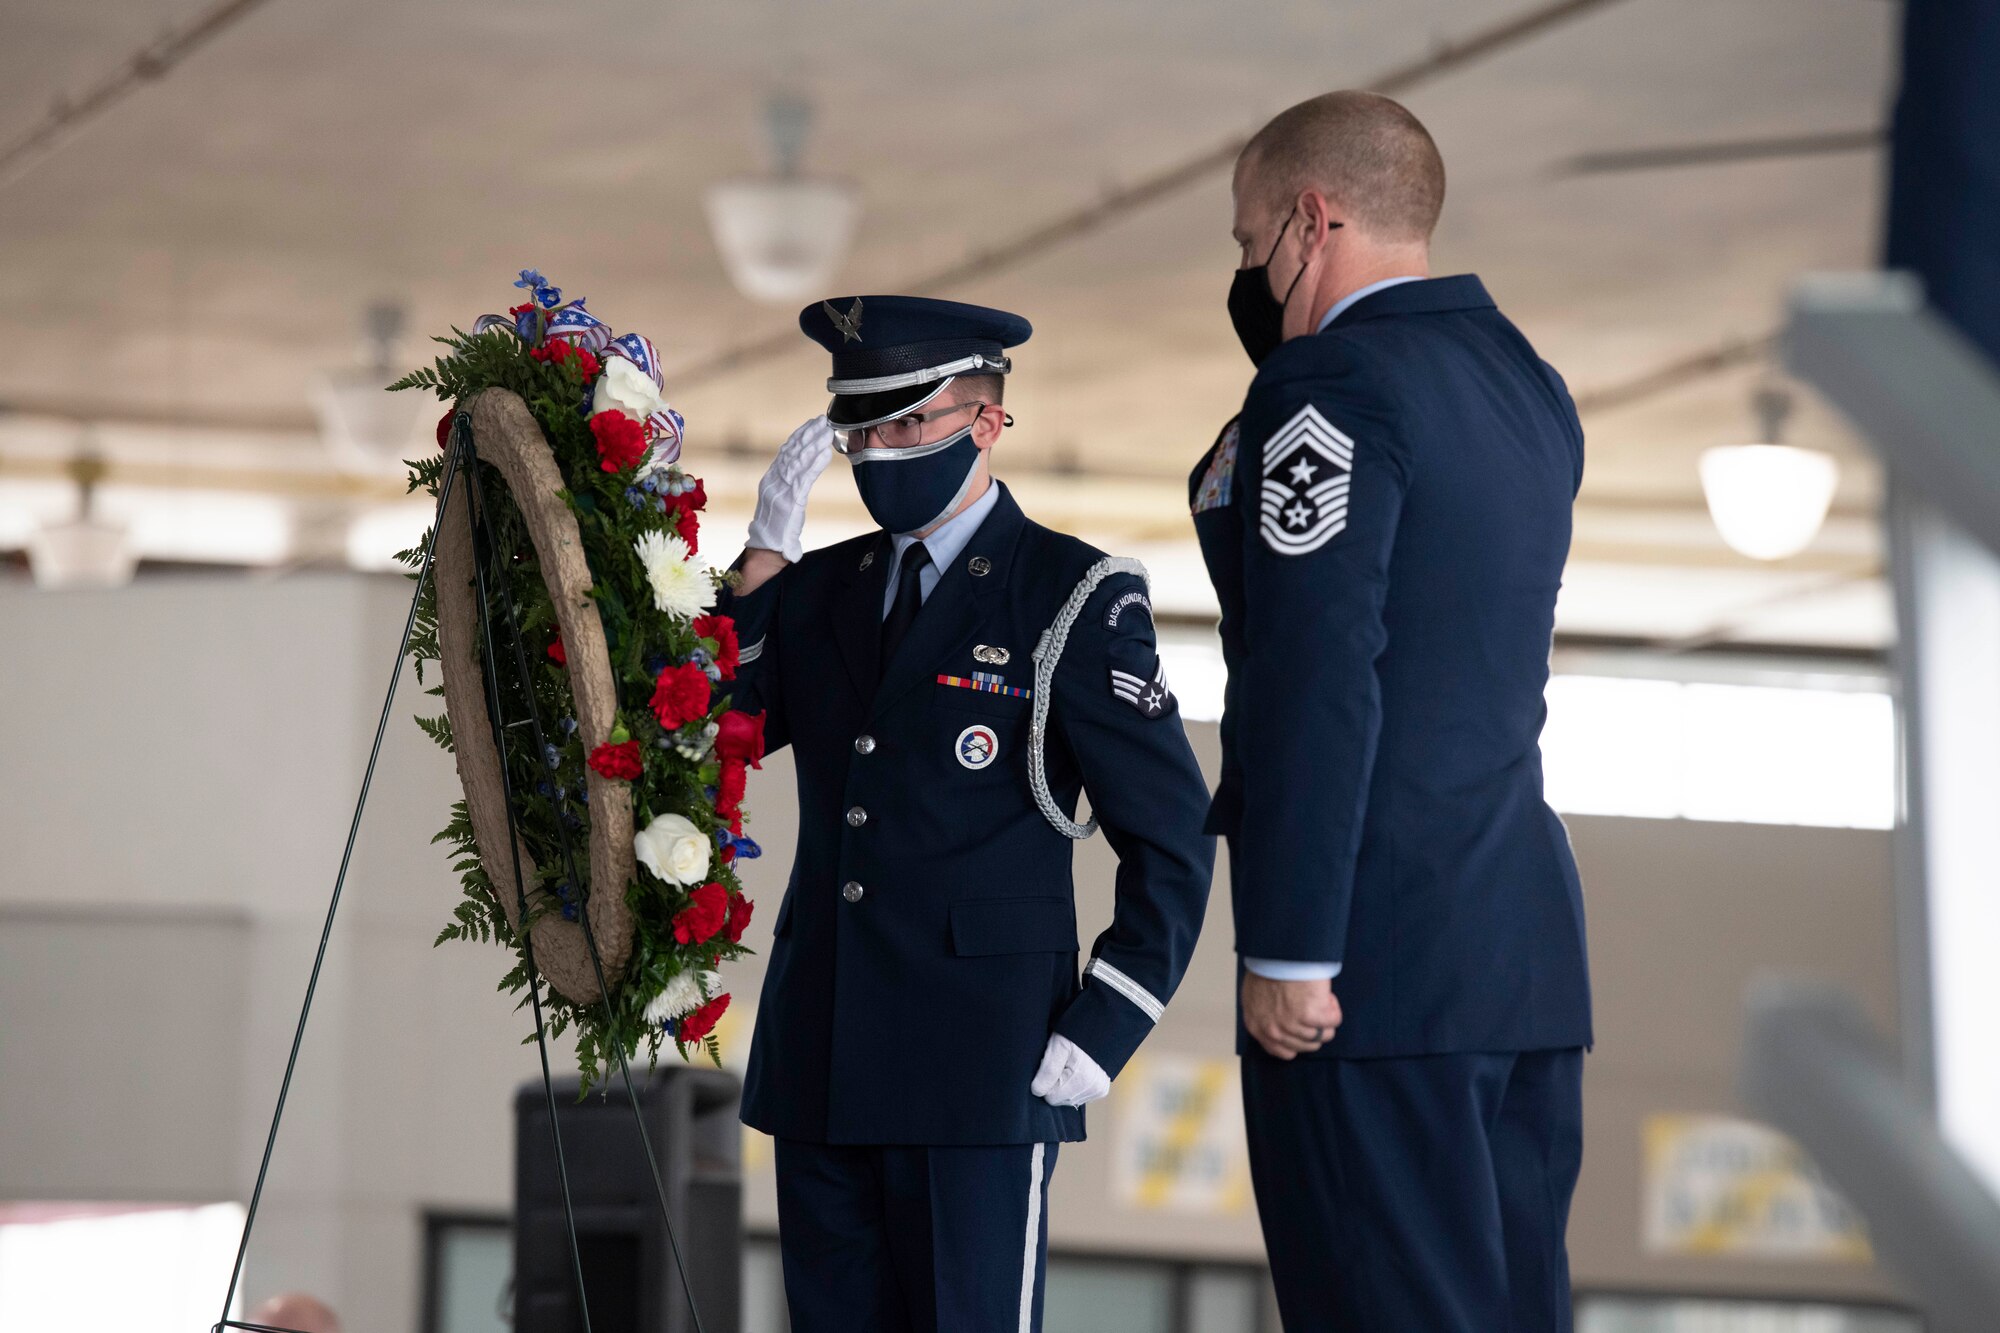 A Maxwell Air Force Base Honor Guard member salutes the wreath alongside Chief Master Sgt. Michael Morgan, 42nd Air Base Wing command chief, Nov. 11, 2020. (U.S. Air Force photo by Senior Airman Charles Welty)